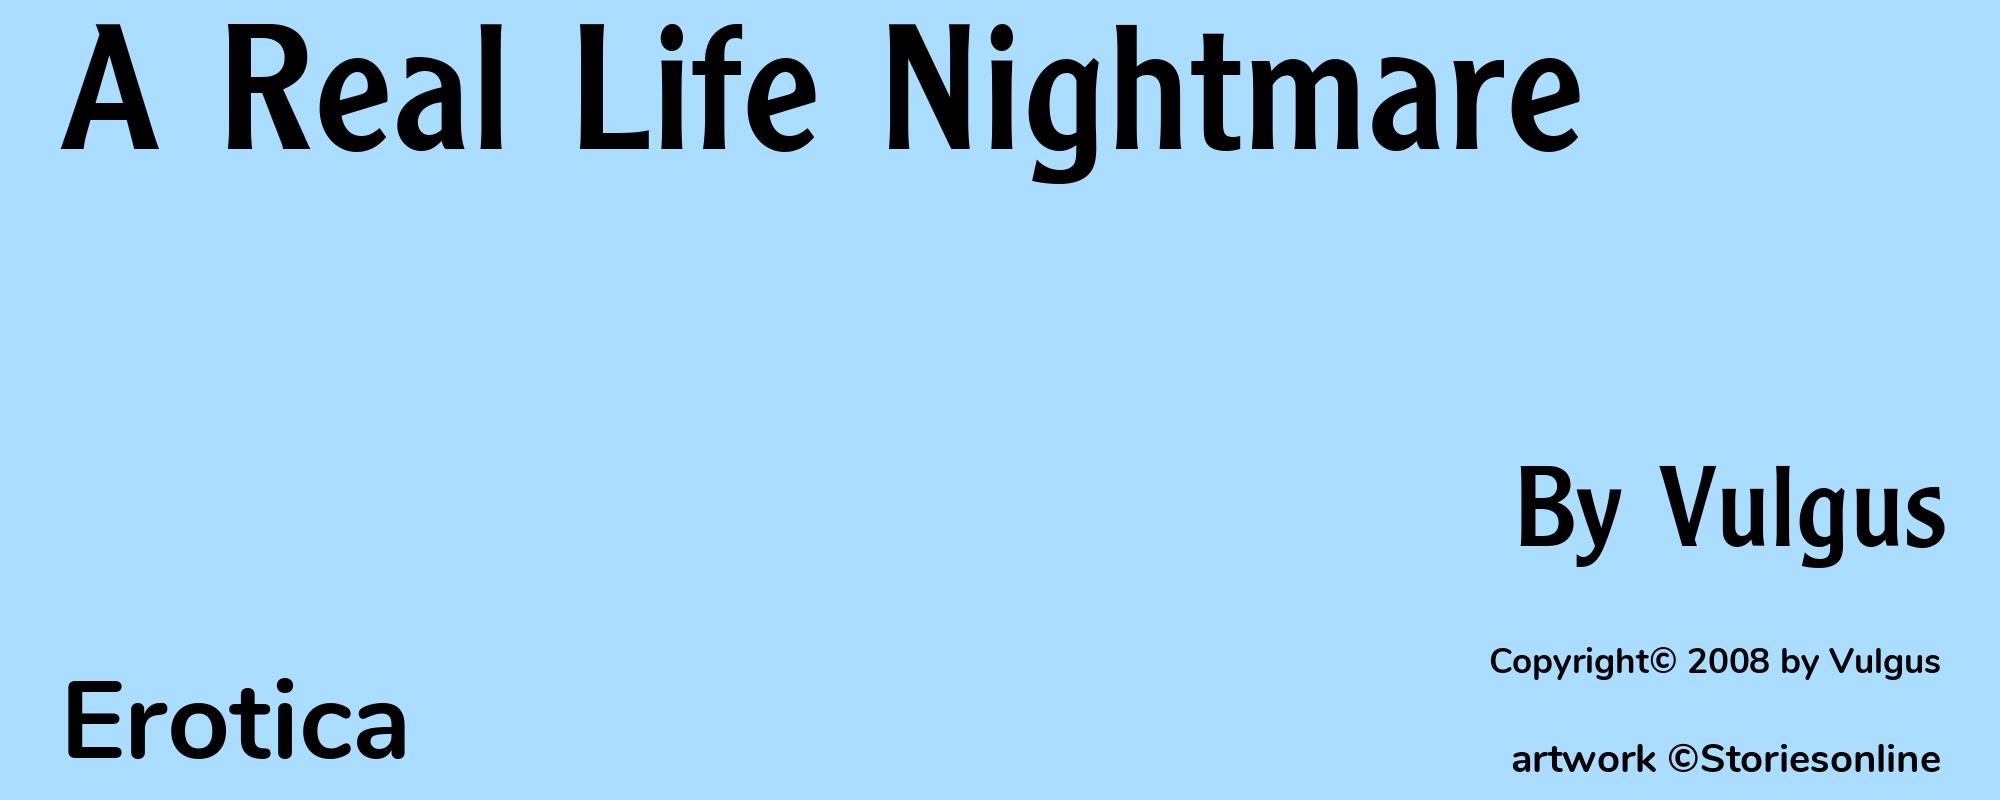 A Real Life Nightmare - Cover